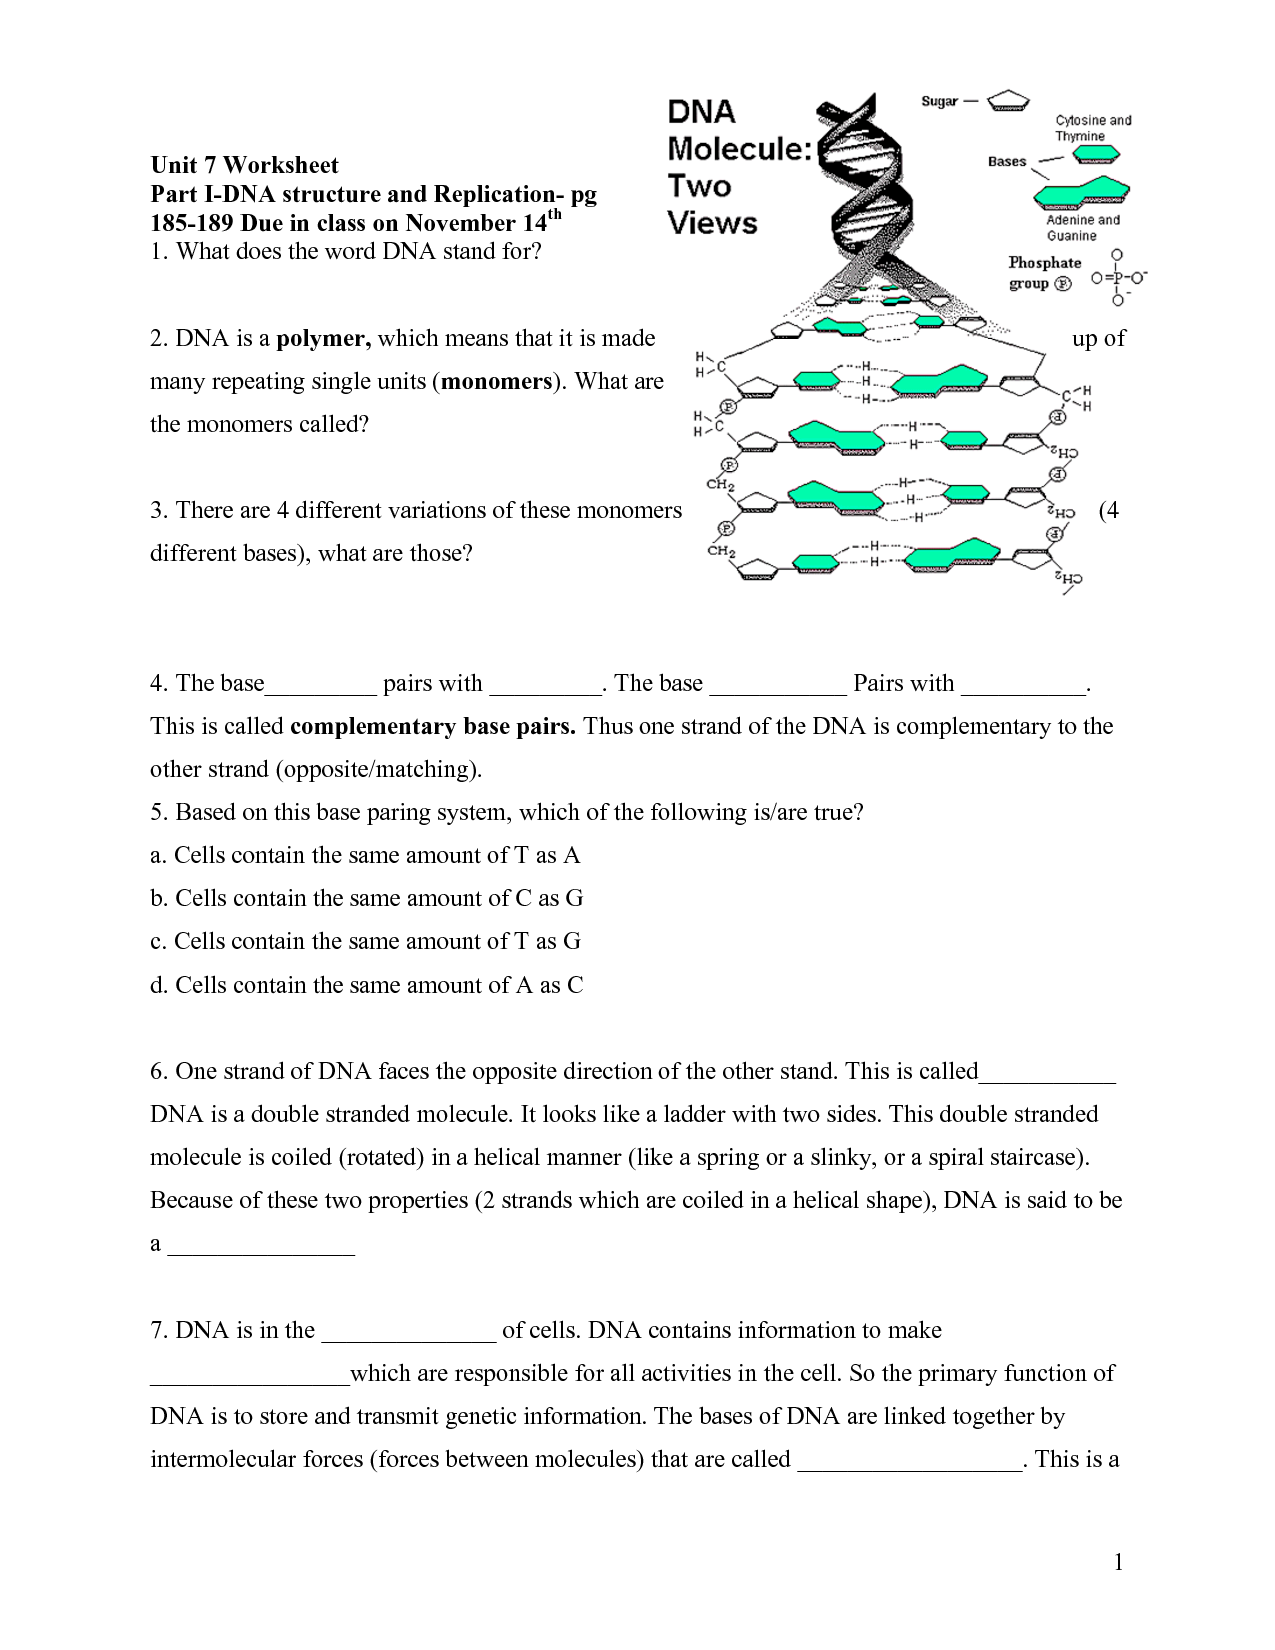 dna-structure-and-function-worksheet-answer-key-herbalful